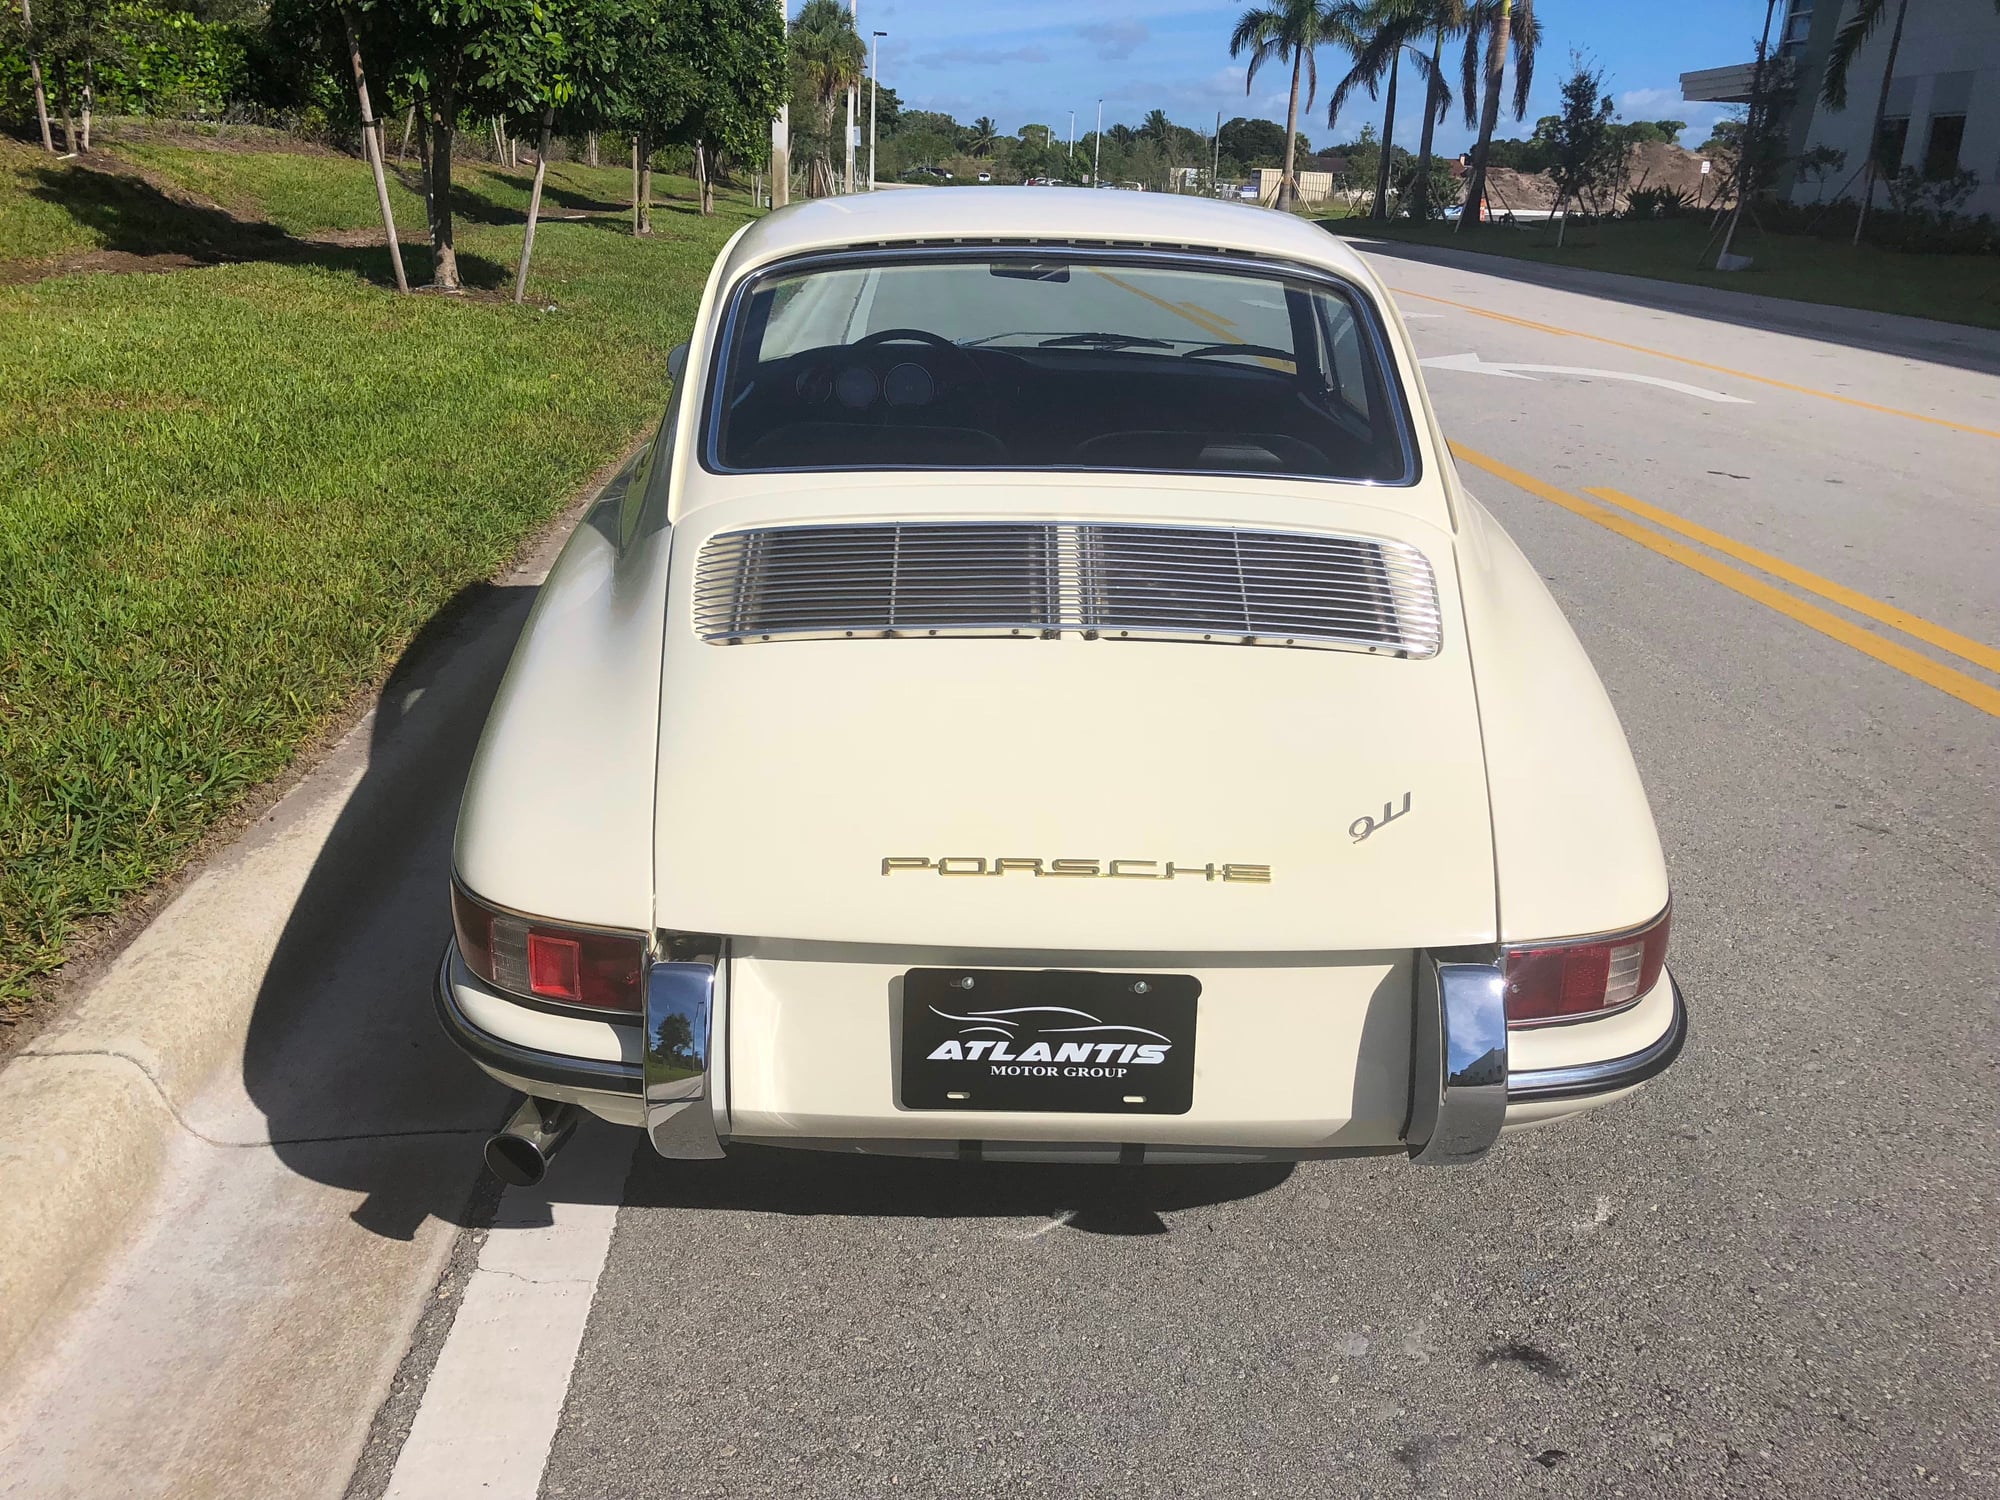 1966 Porsche 911 - 1966 Porsche 911 - All numbers matching - Restored - Used - VIN 00000000000303545 - 19,000 Miles - 2 cyl - 2WD - Automatic - Coupe - White - Deerfield Beach, FL 33441, United States